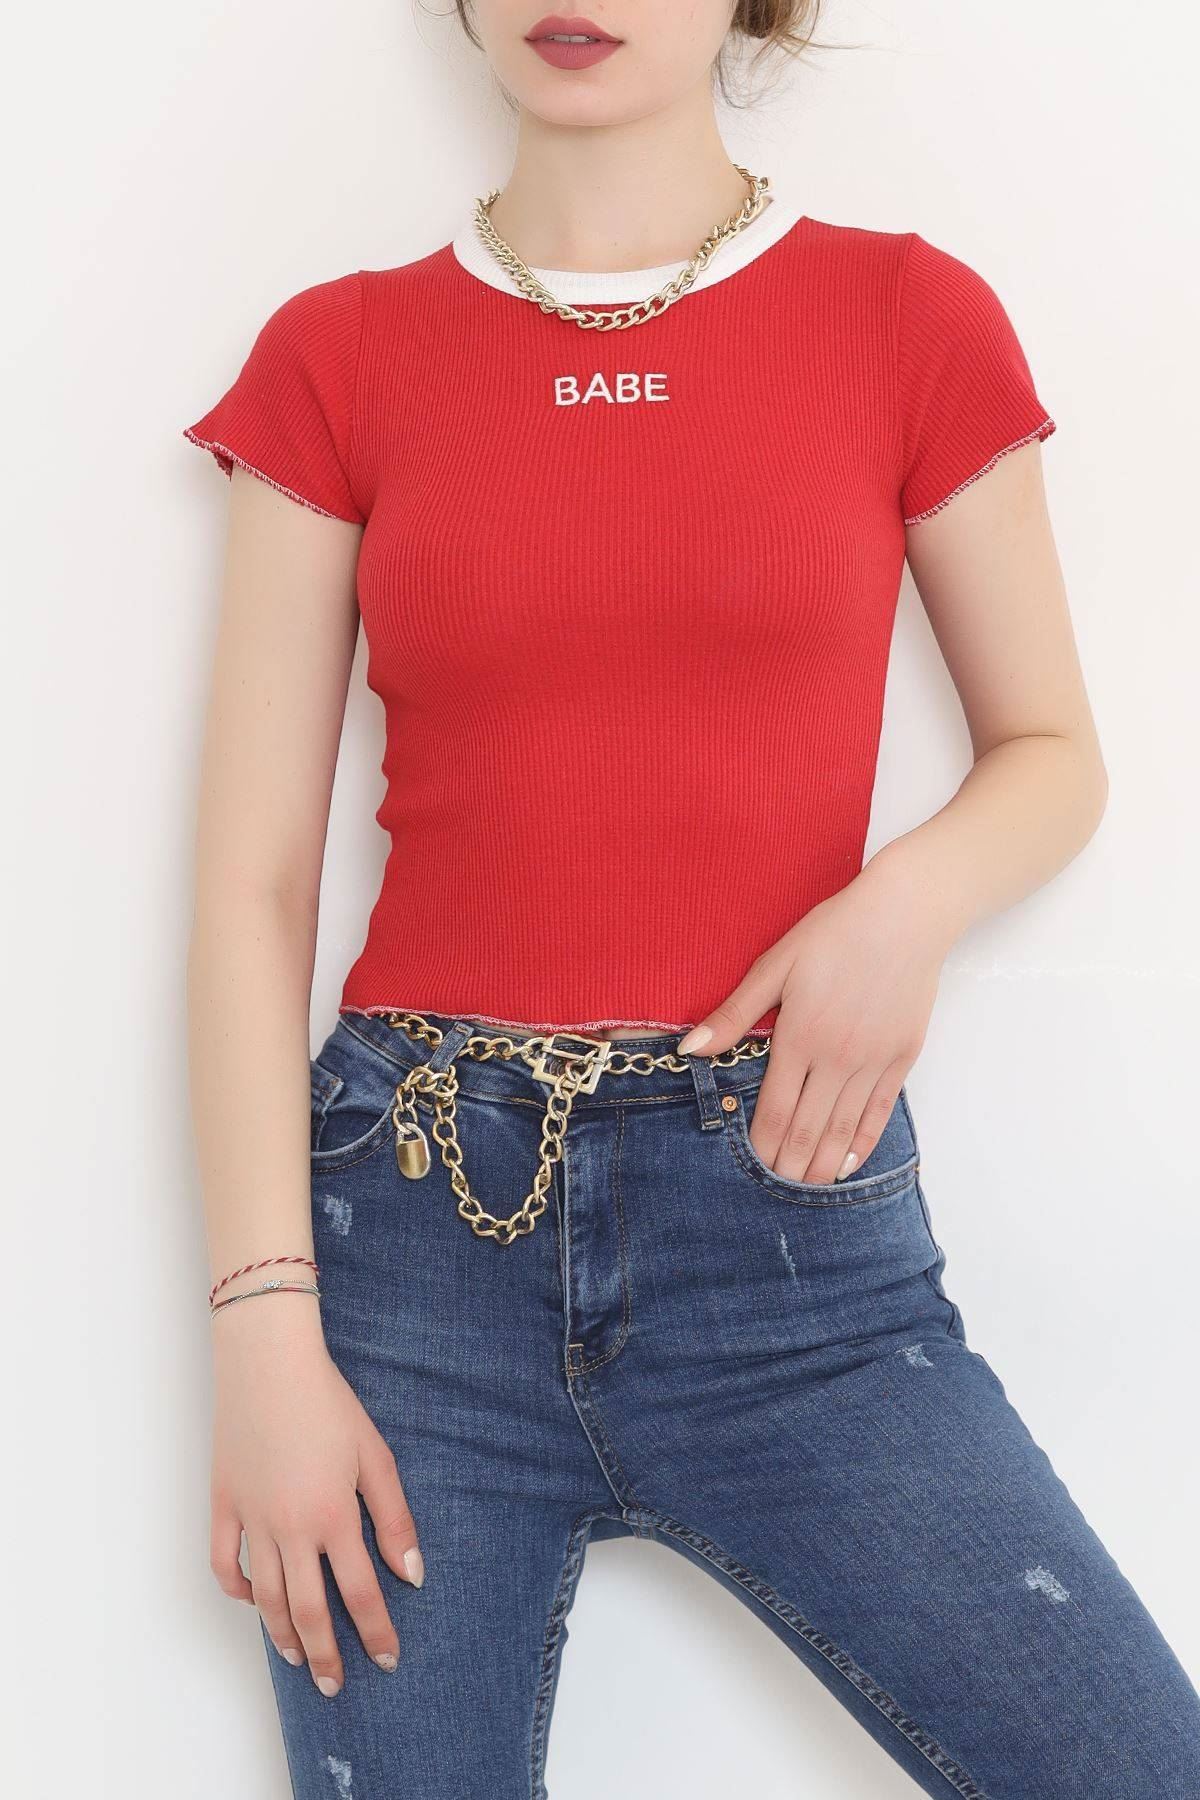 A model wears HAV11376 - Babe Embroidered Blouse Red - 11009.1567., wholesale Blouse of Helin Avşar to display at Lonca